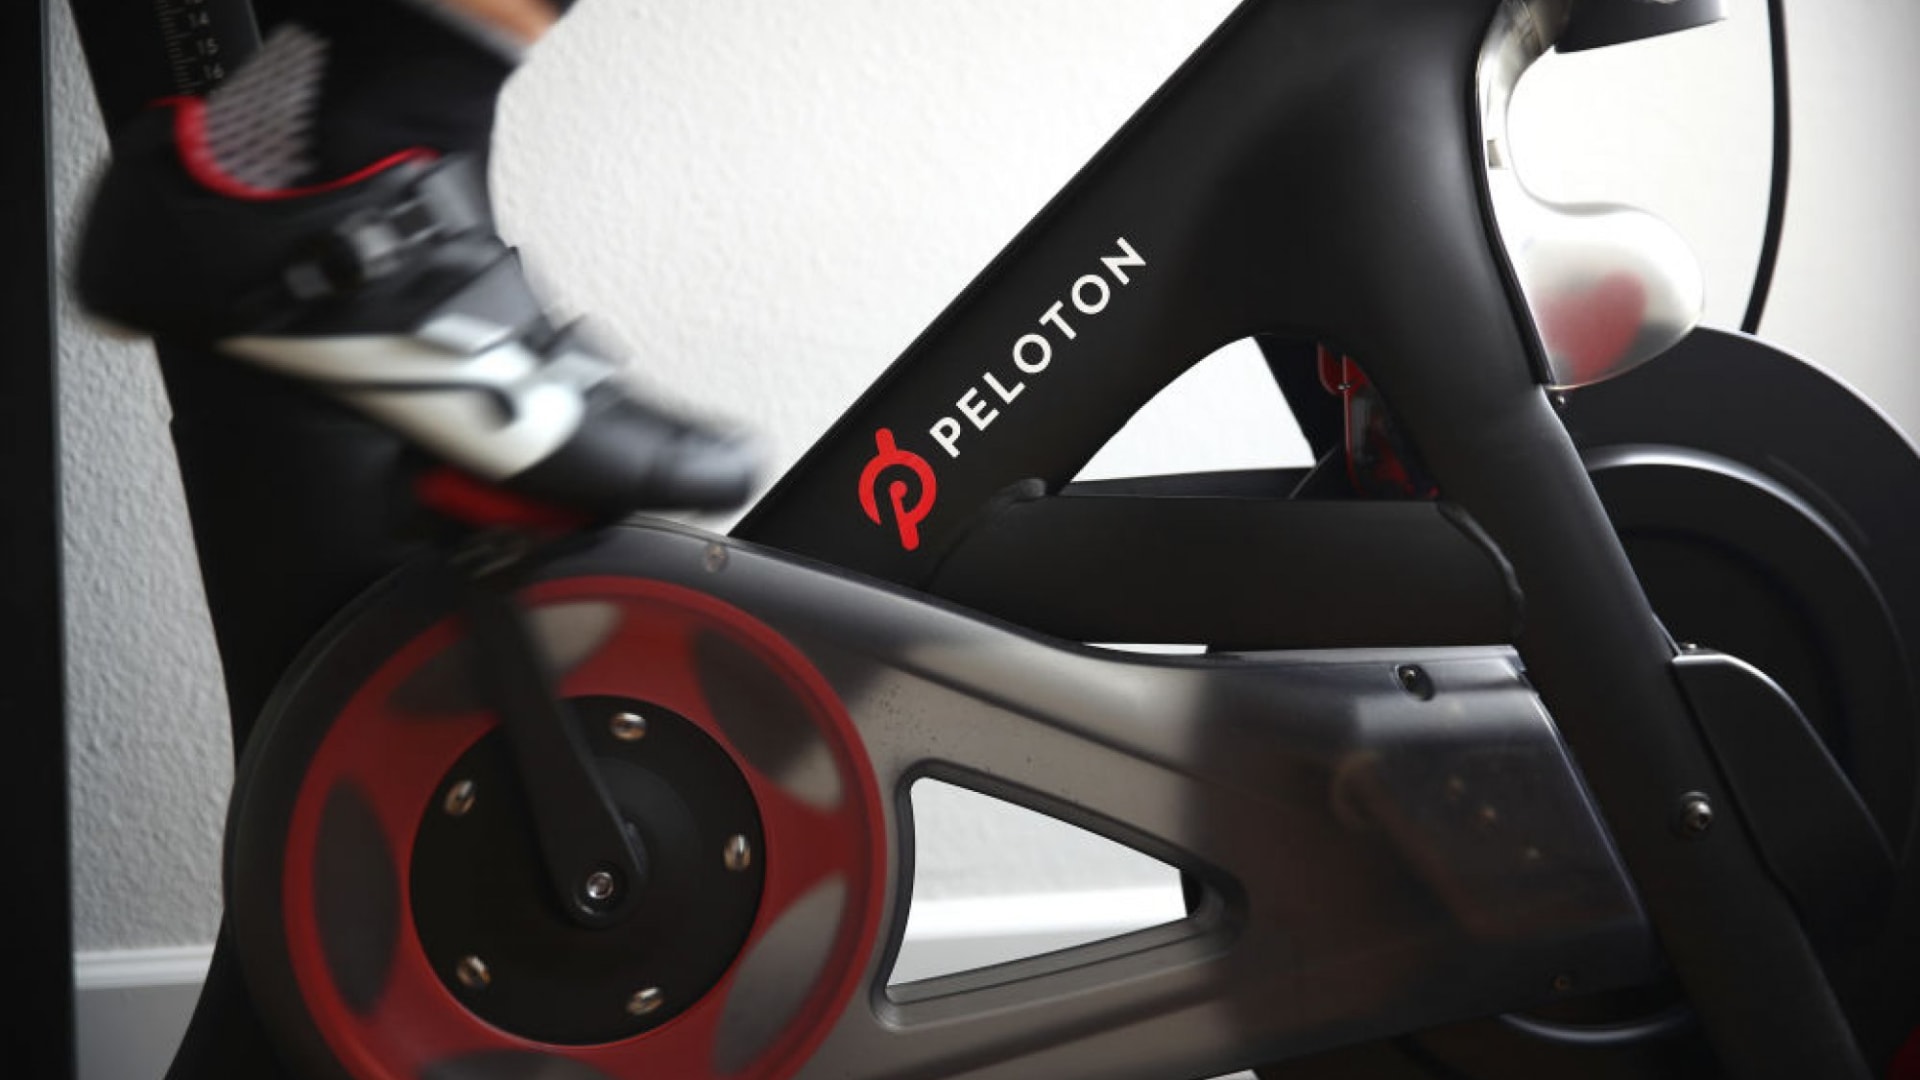 Peloton's Latest Strategy to Save the Company Is the 1 Thing No Company Should Ever Do